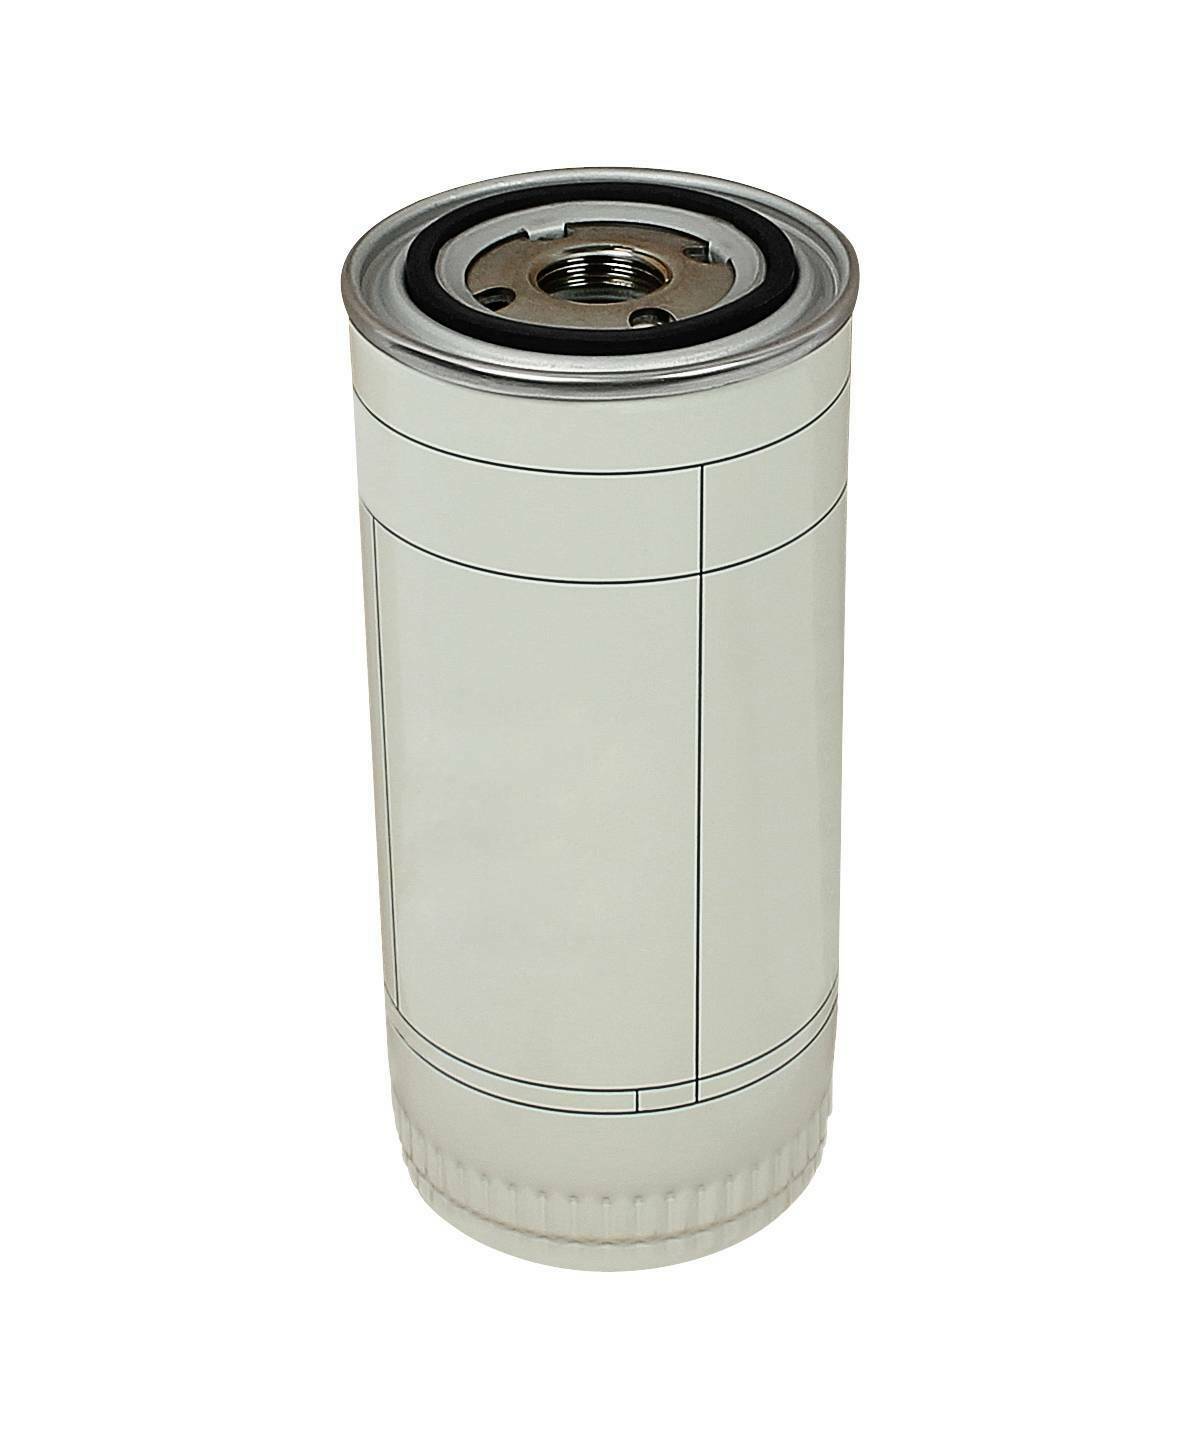 Oil filter DT Spare Parts 7.59015 Oil filter D: 96 mm 1" x 12 UNF H: 216 mm